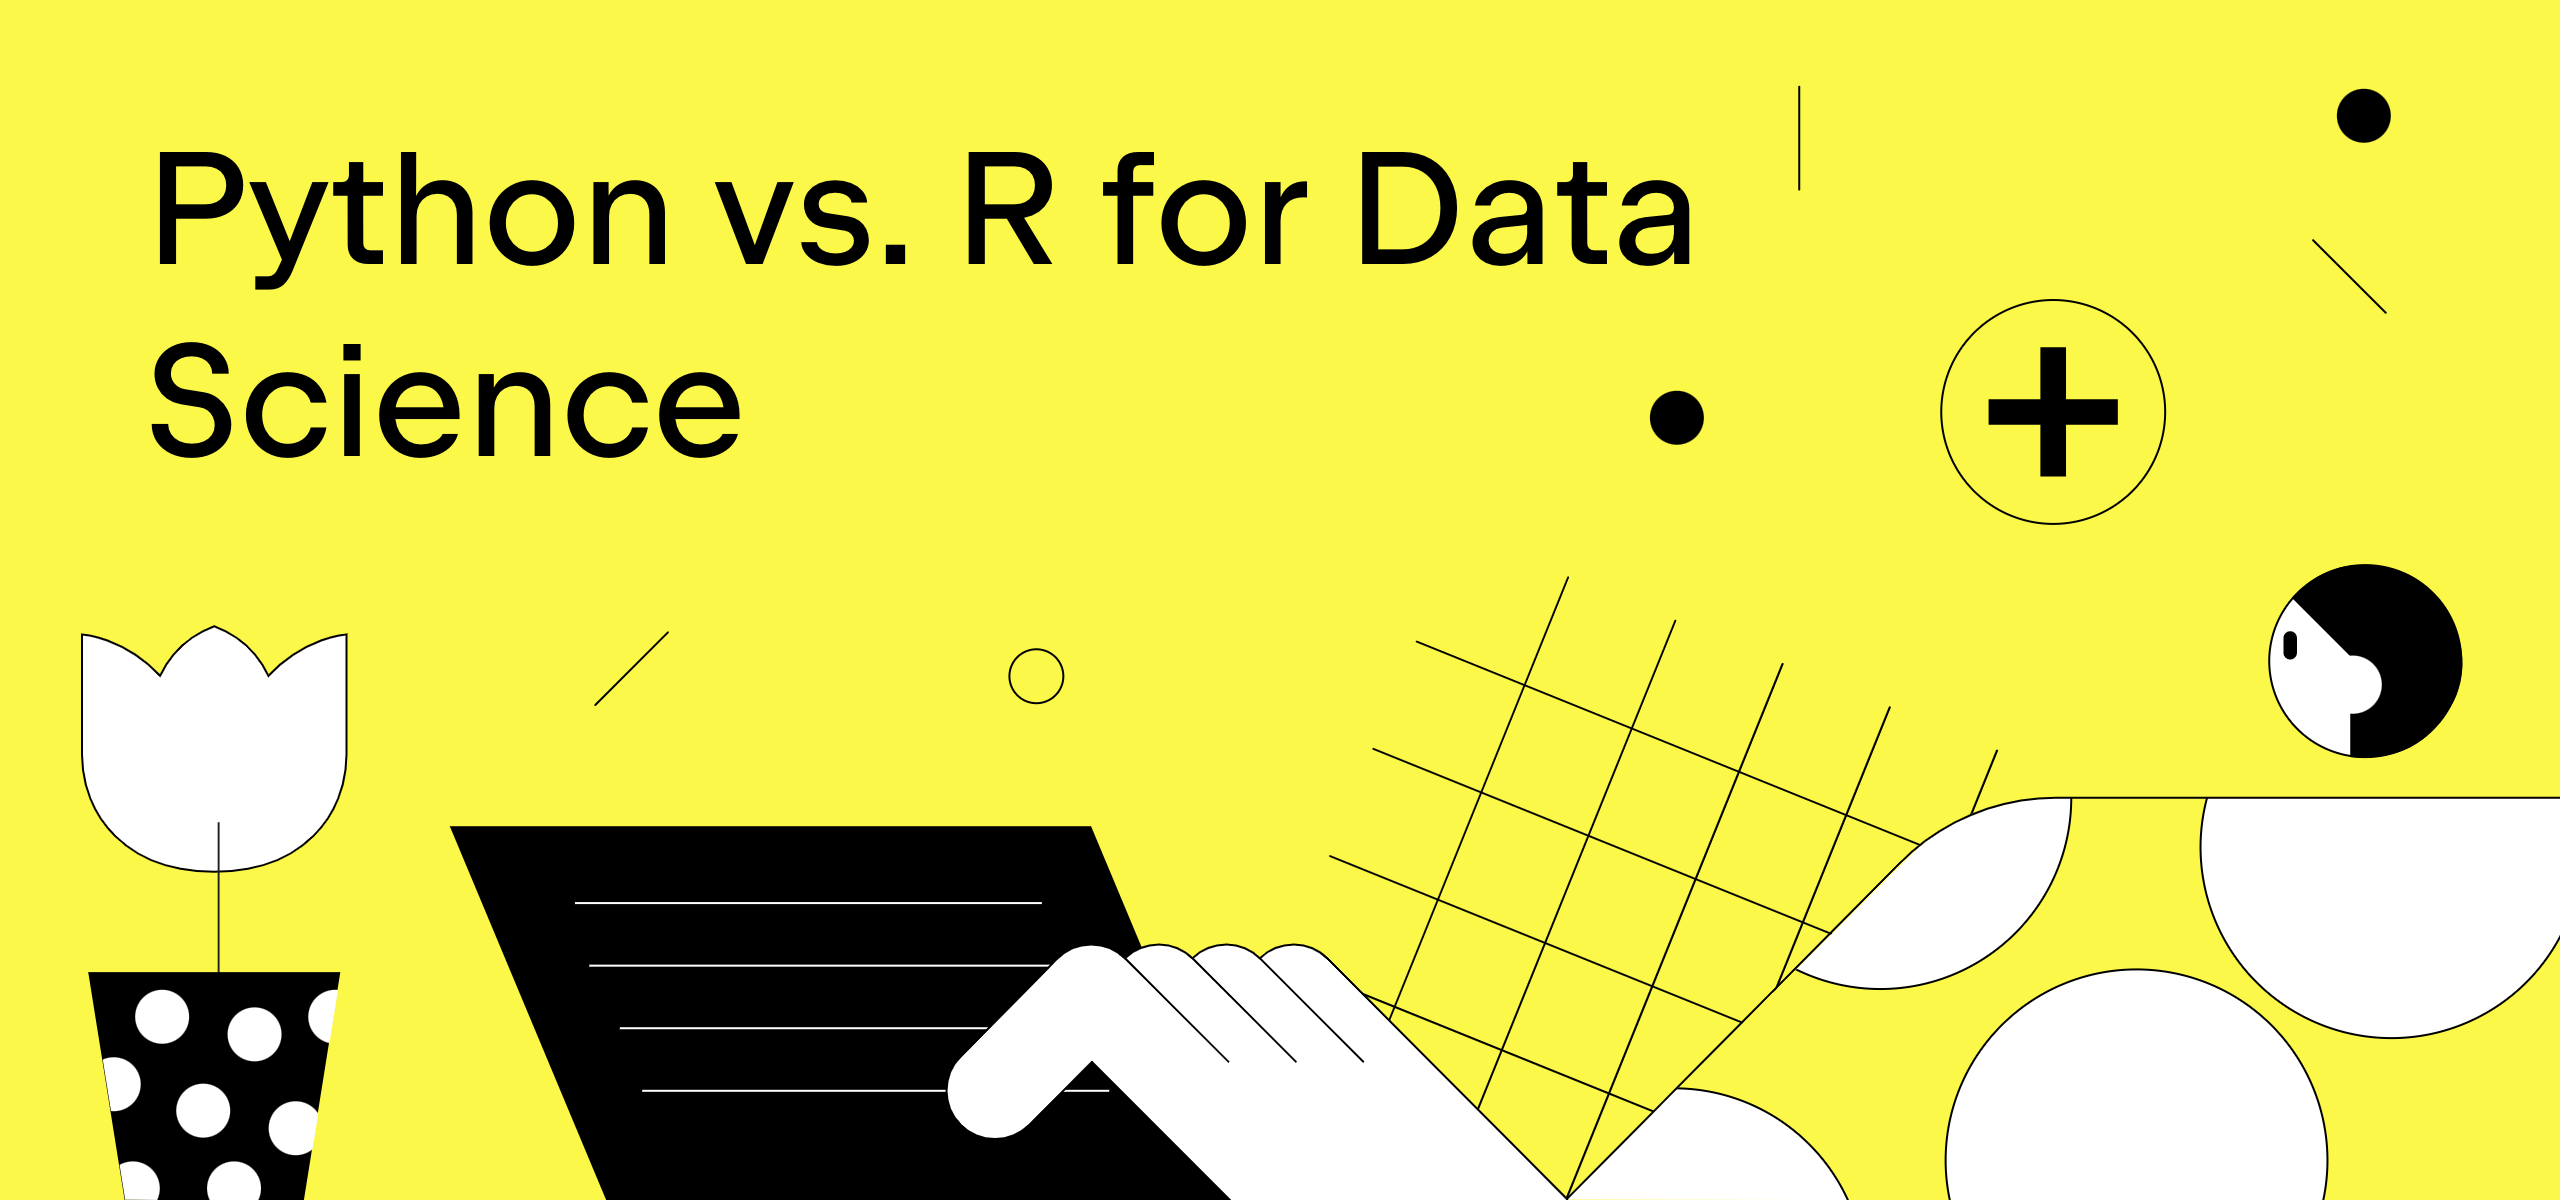 A Comparison of Python vs. R for Data Science